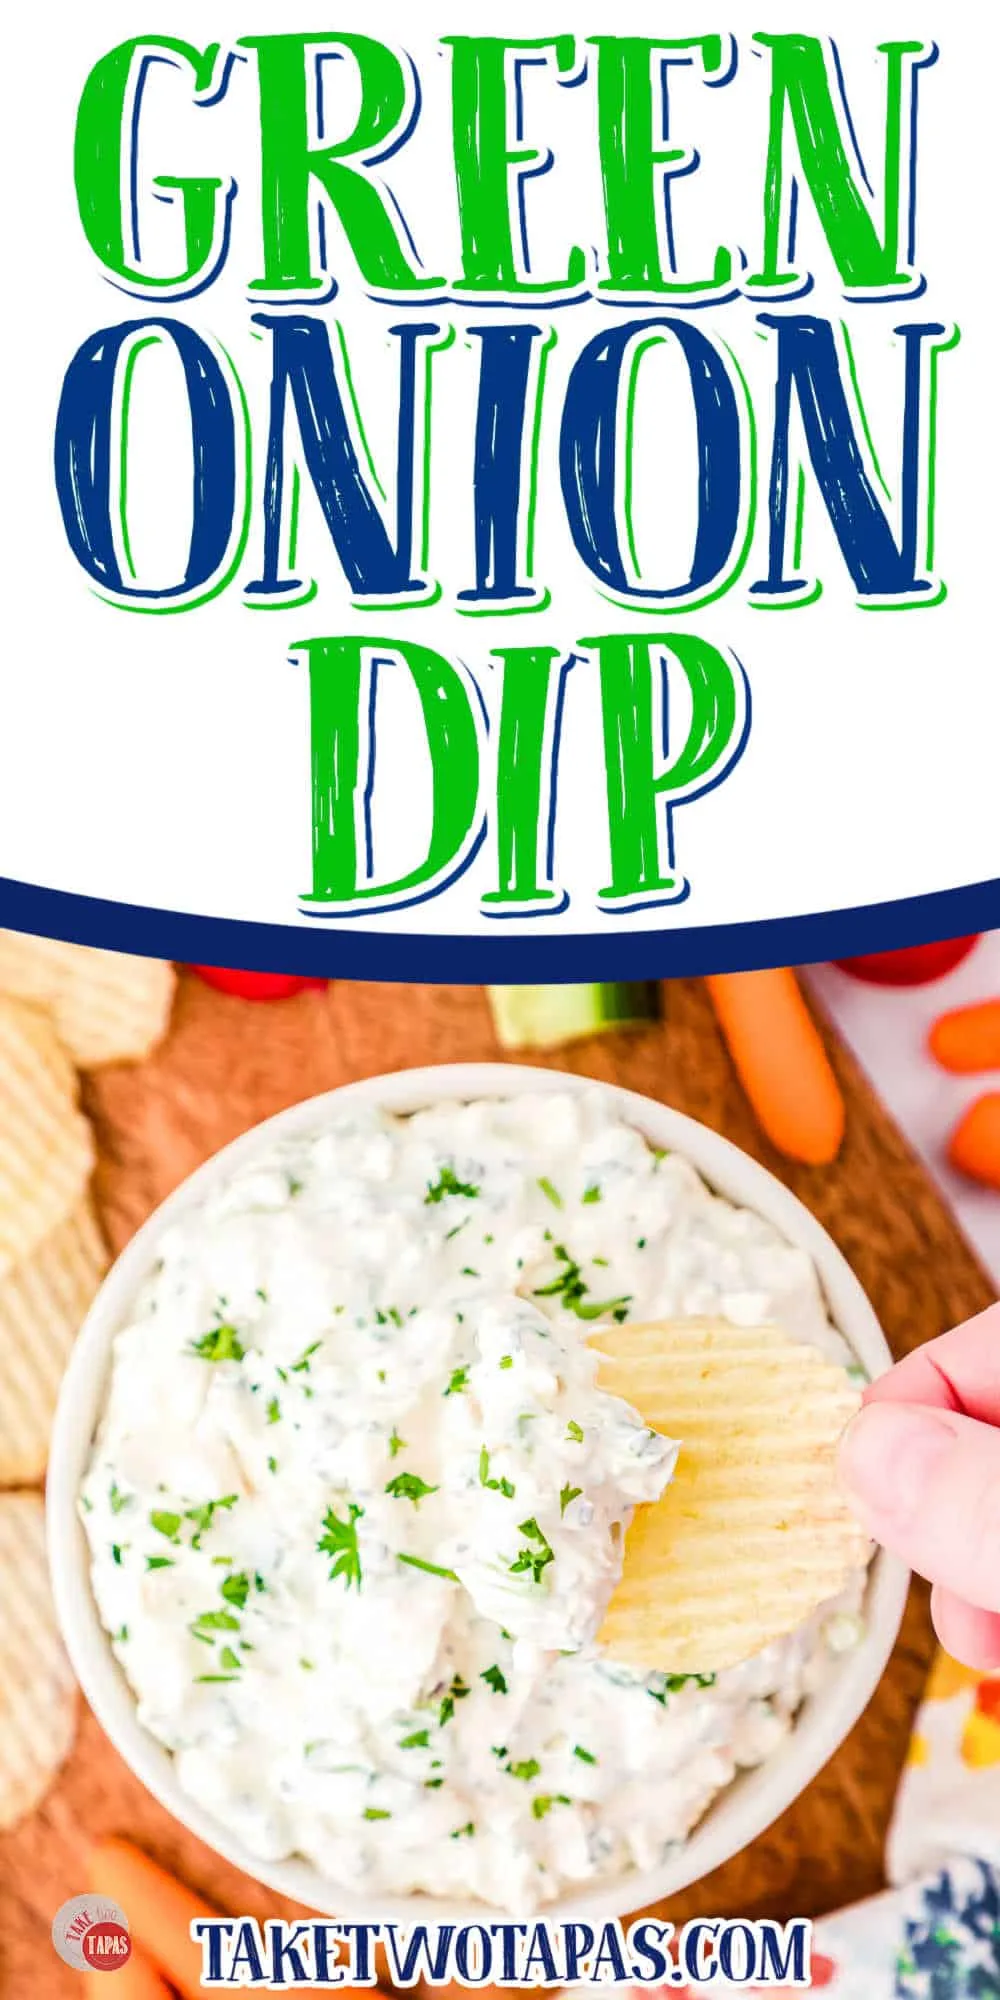 Top view of a small white bowl on a worktop filled with green onion dip garnished with parsley with a chip being lifted in mid-air that has some dip on it. There is a textbox at the top saying "Green Onion Dip".